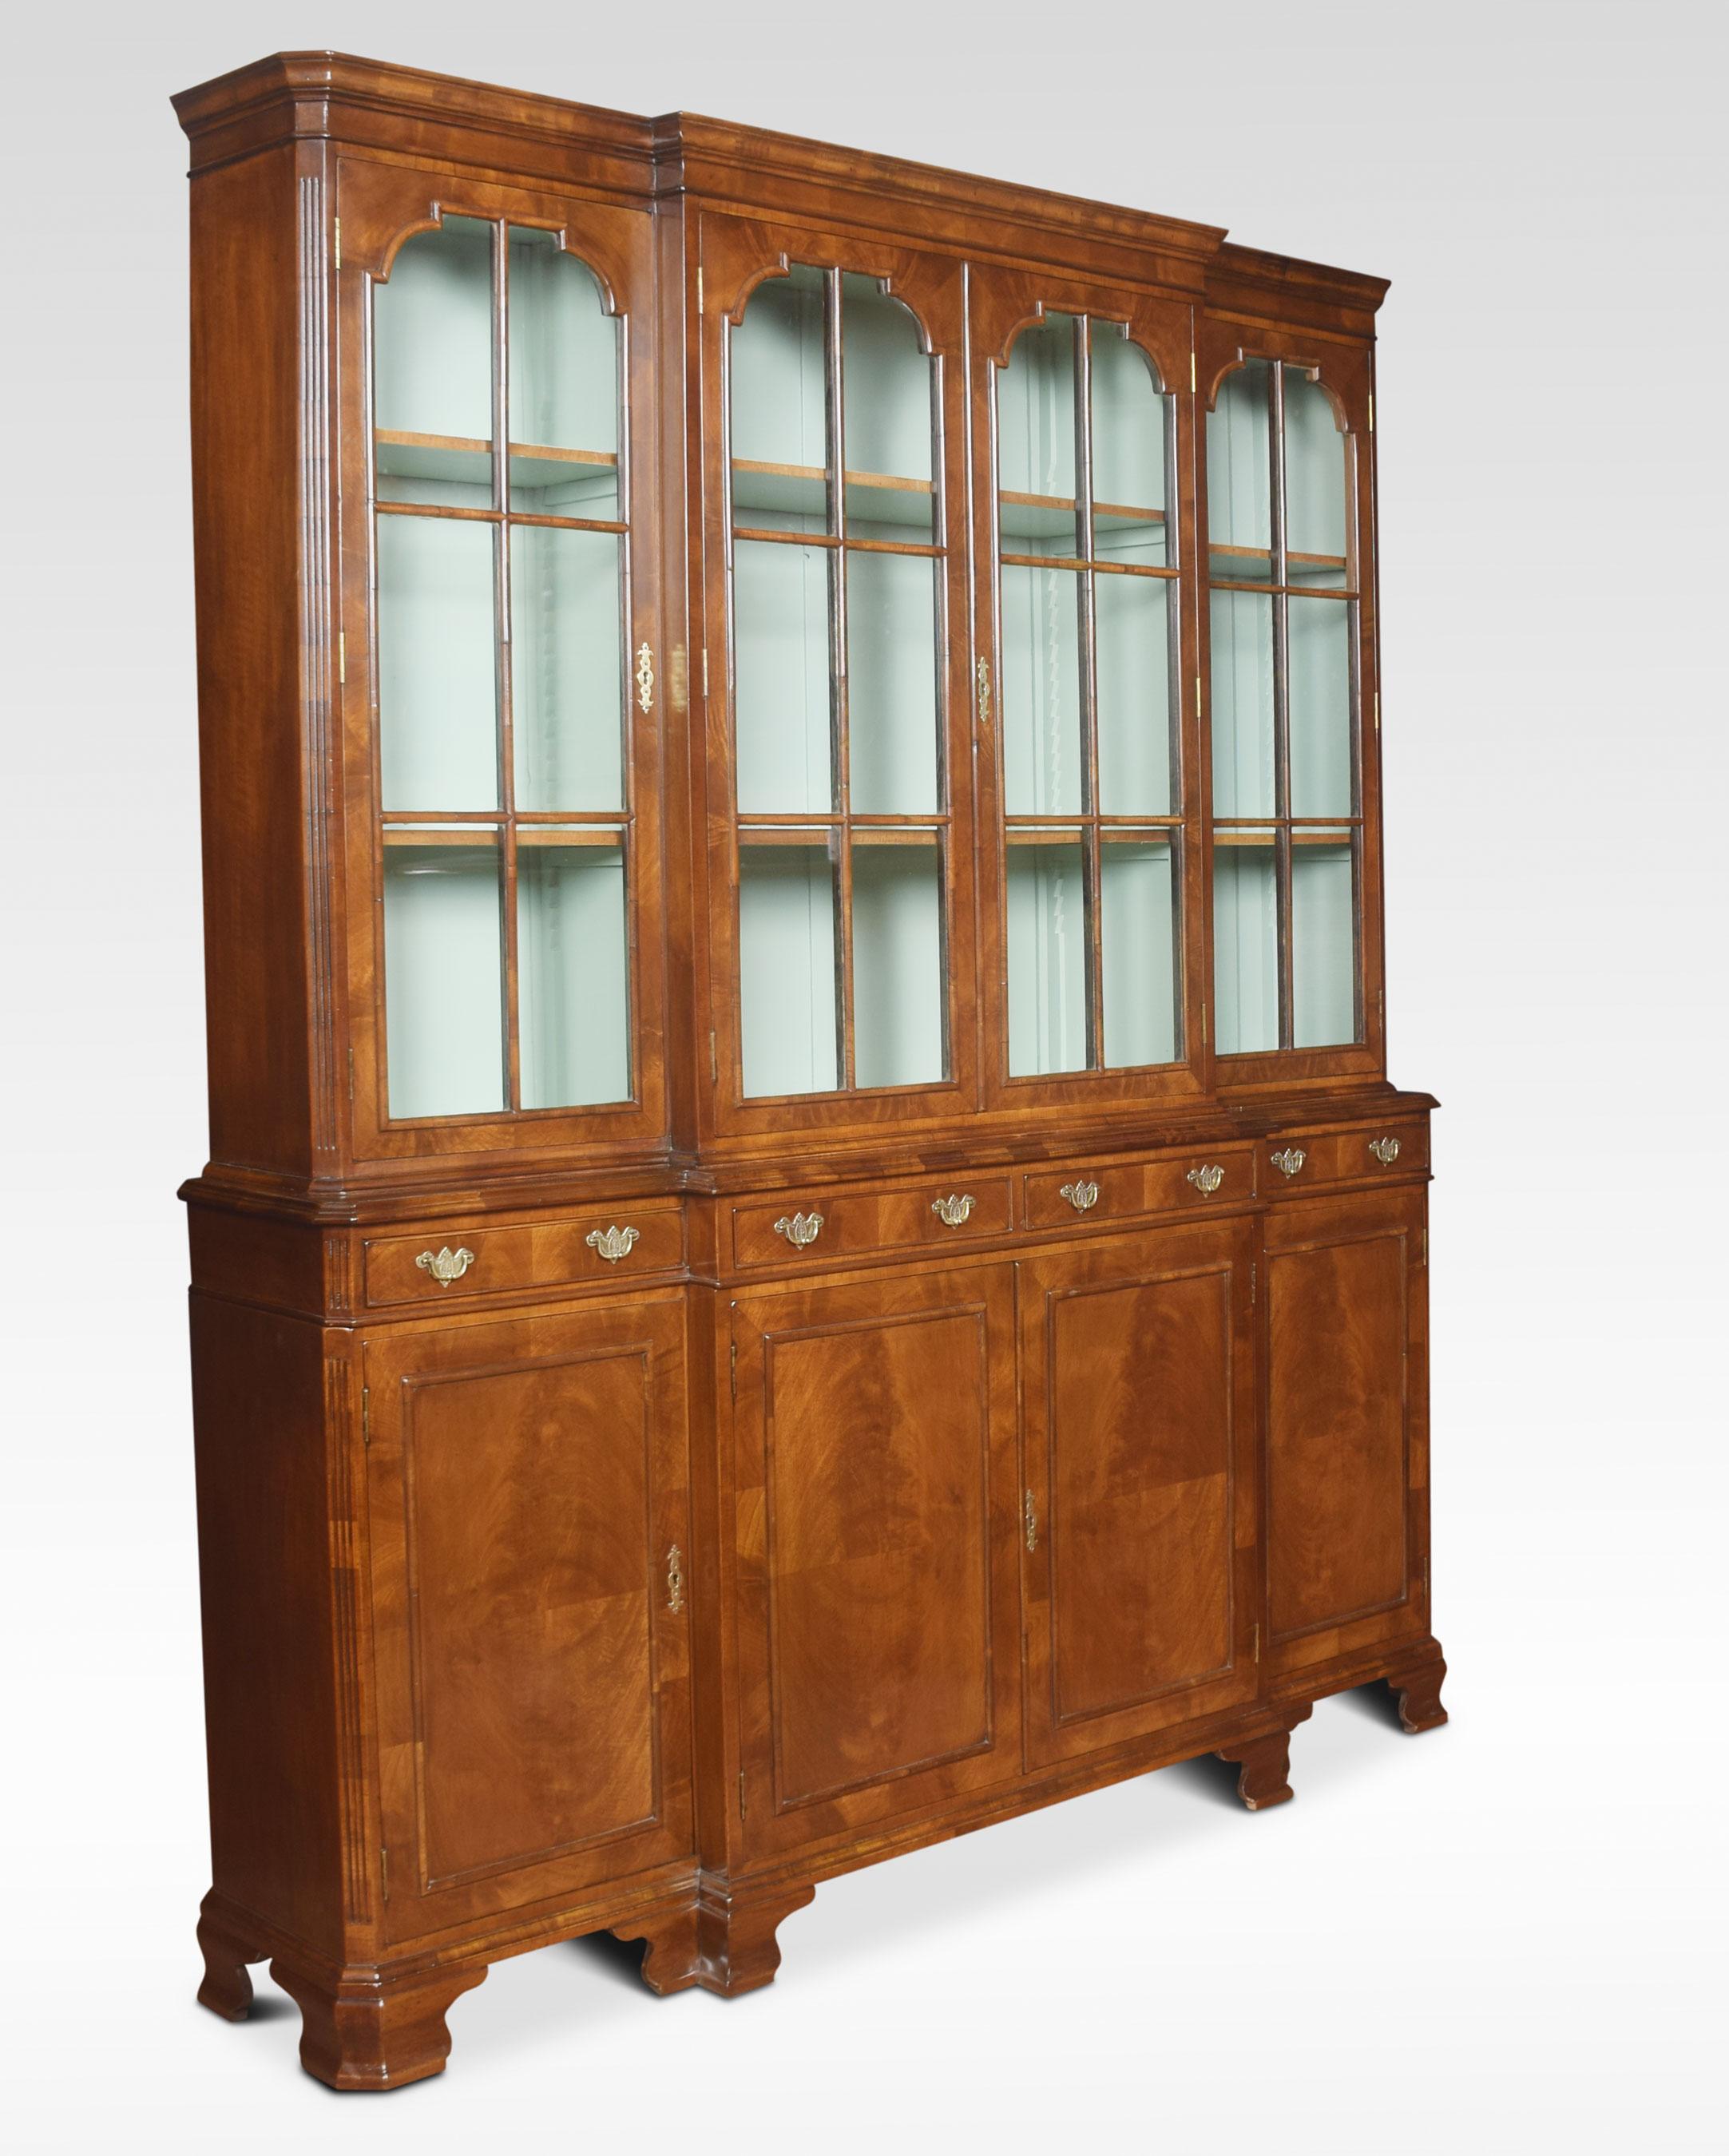 Queen Anne revival walnut four-door bookcase, the projecting cornice above, four large glazed doors opening to reveal an adjustable shelved interior. To the base Dimensions
Measures: Height 82.5 inches
Width 71.5 inches
Depth 15 inches.